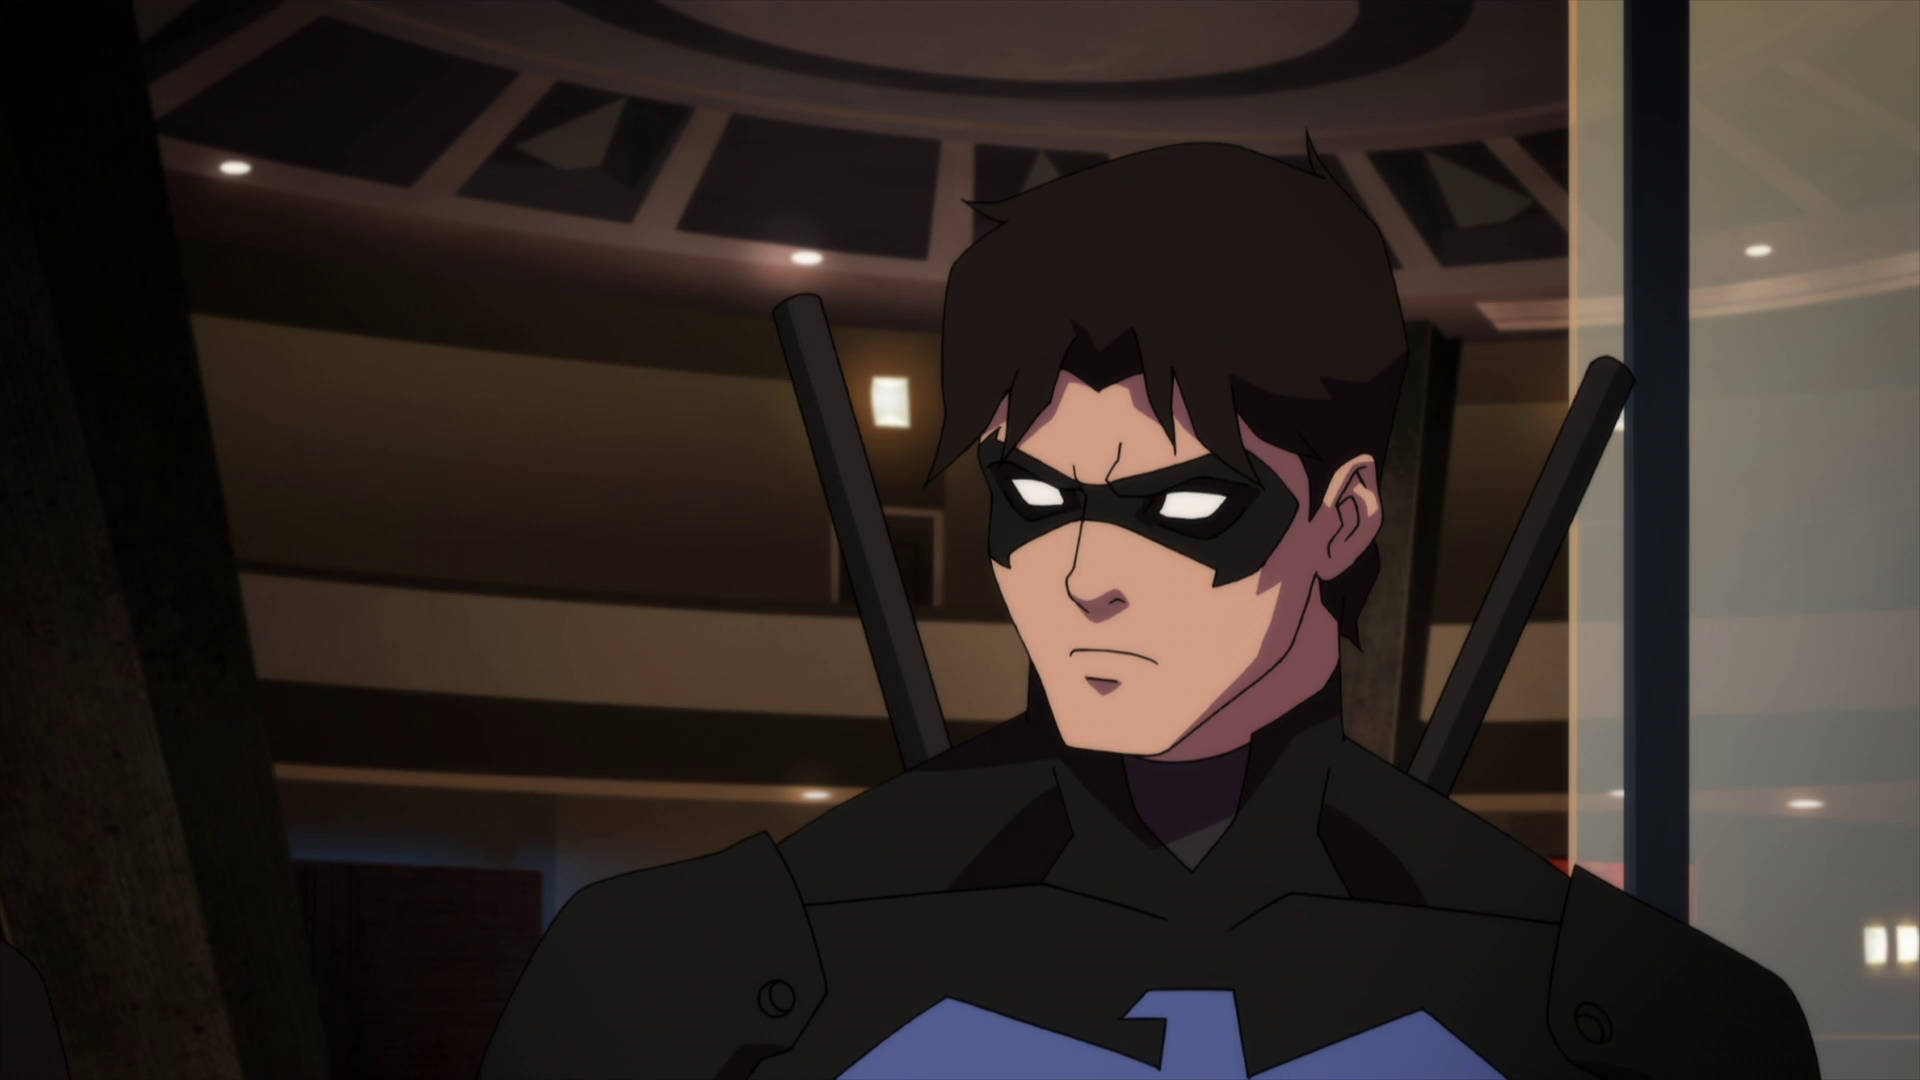 young justice nightwing logo